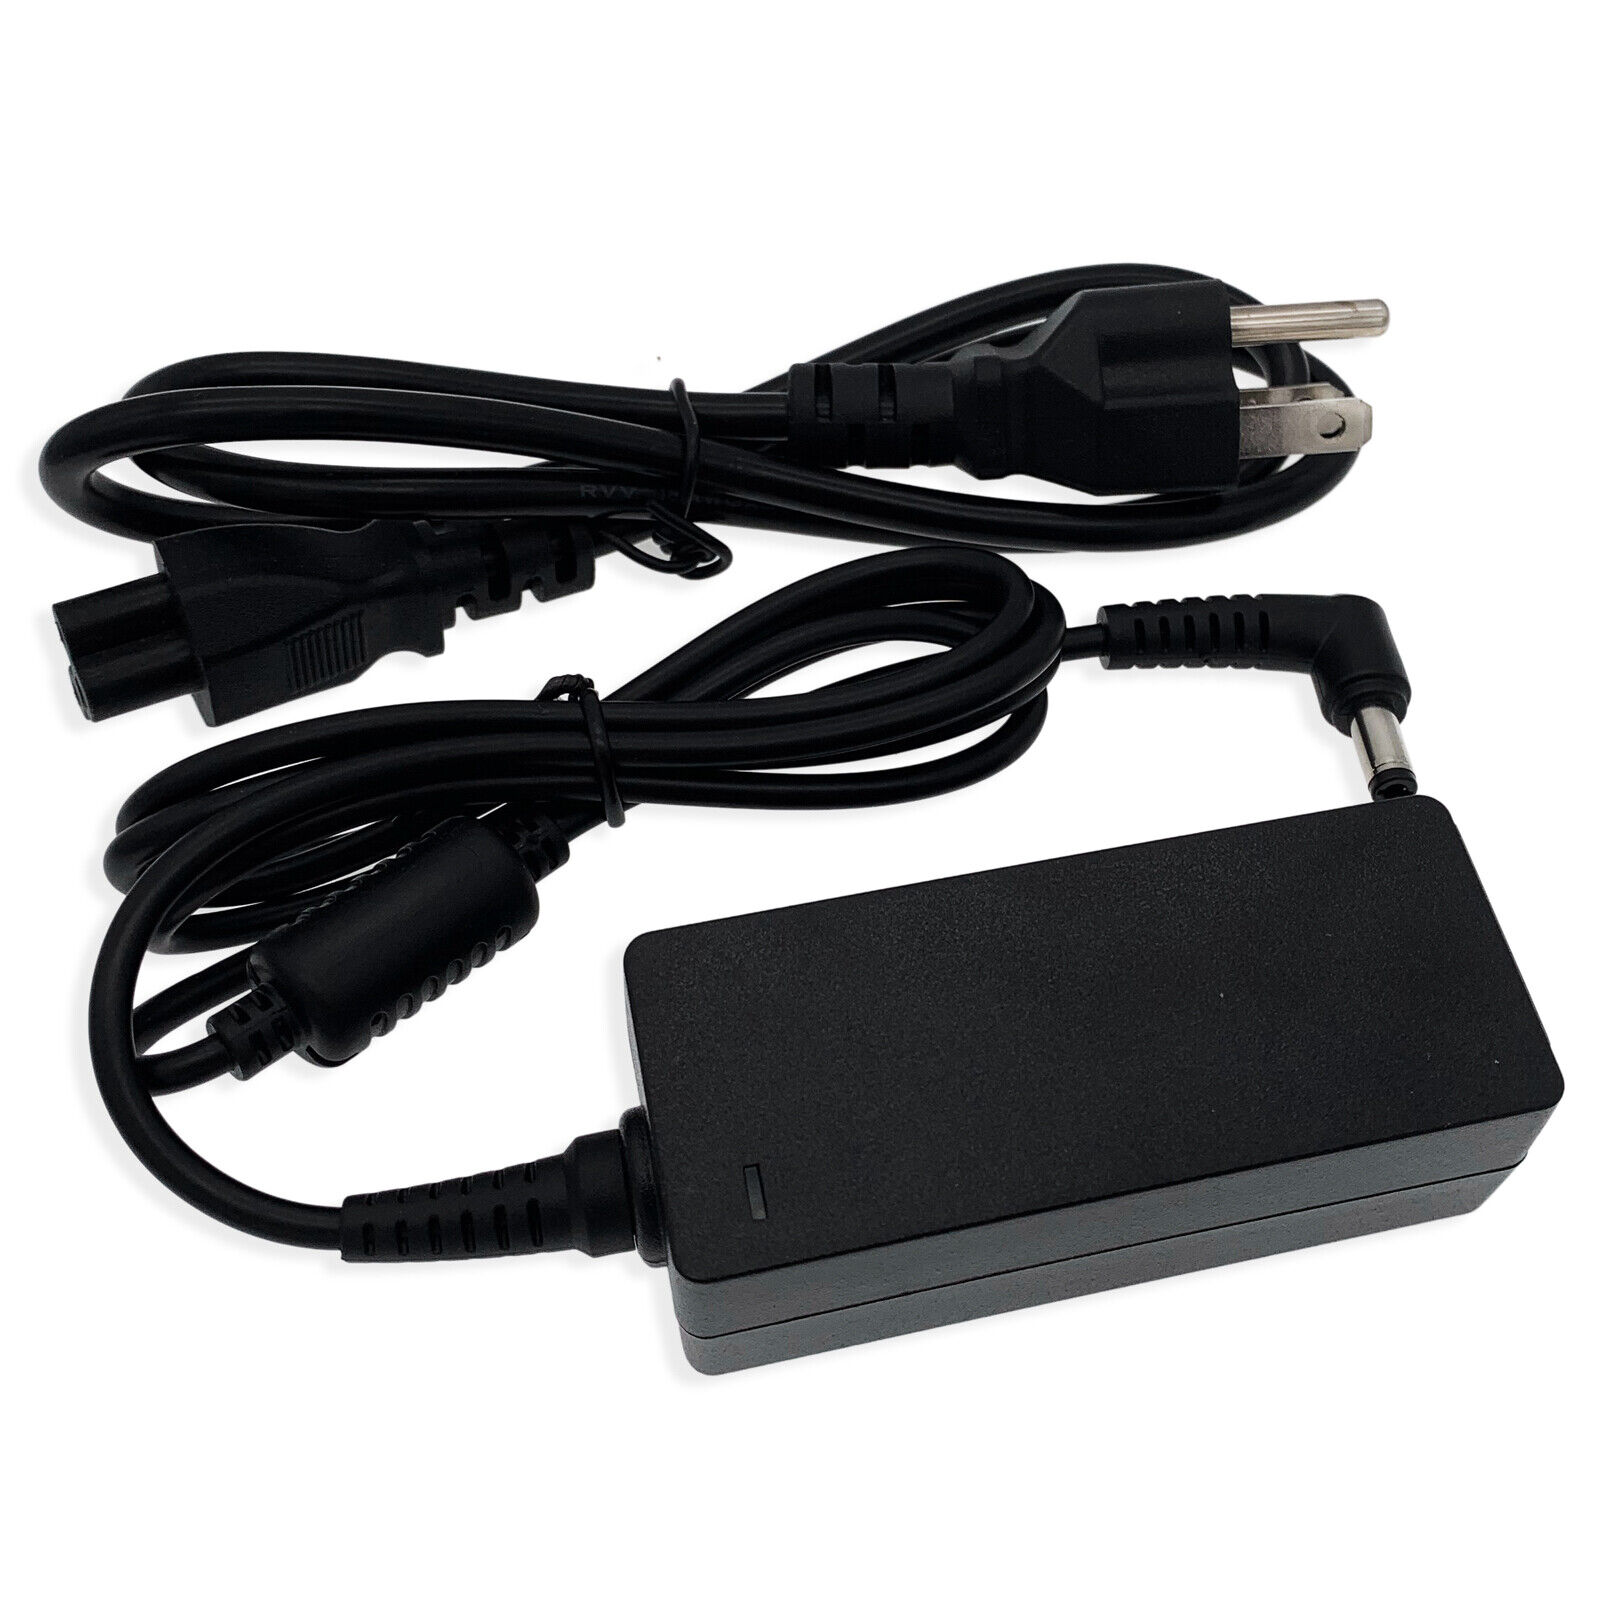 *Brand NEW*ITRONIX GoBook II GoBook III 65W 19V 3.42A AC DC ADAPTER CHARGER POWER SUPPLY CORD